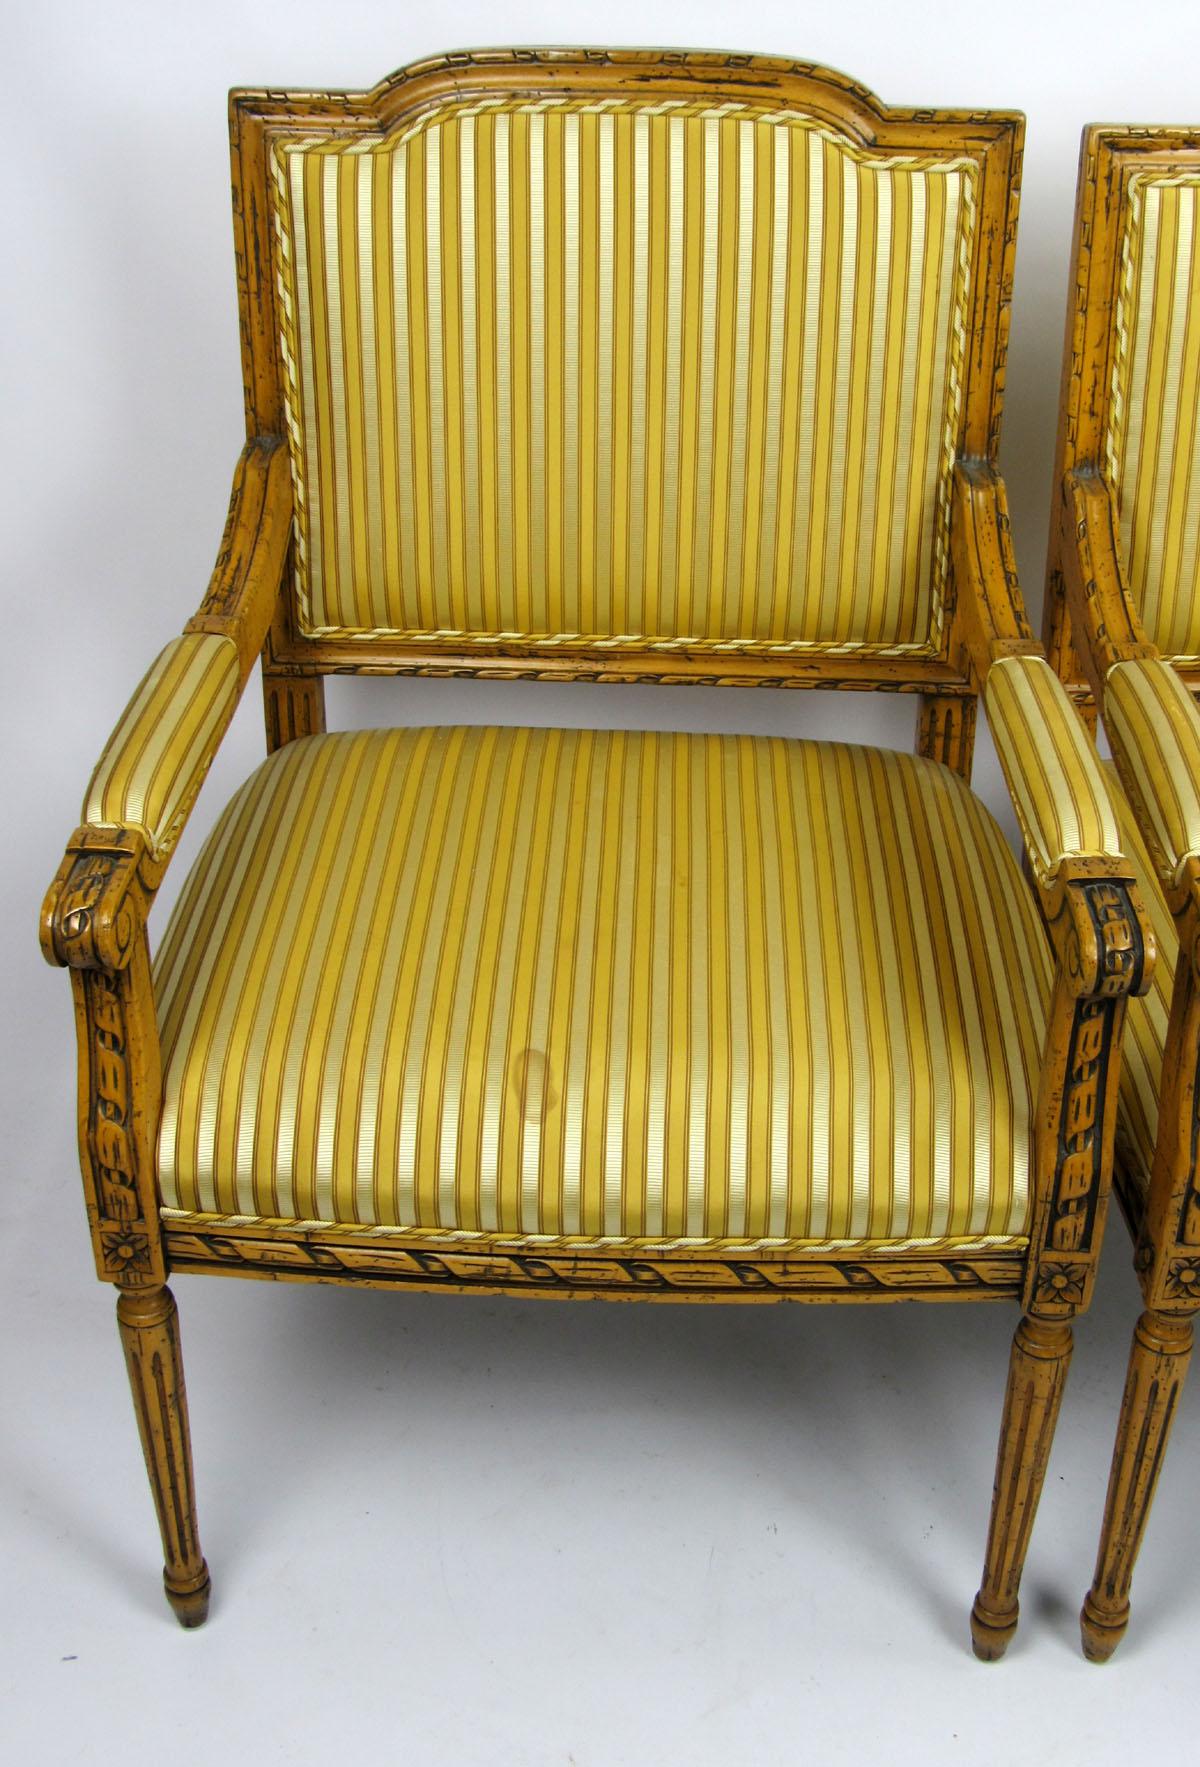 Pair of 20th century Italian armchairs in a striped yellow and gold fabric.